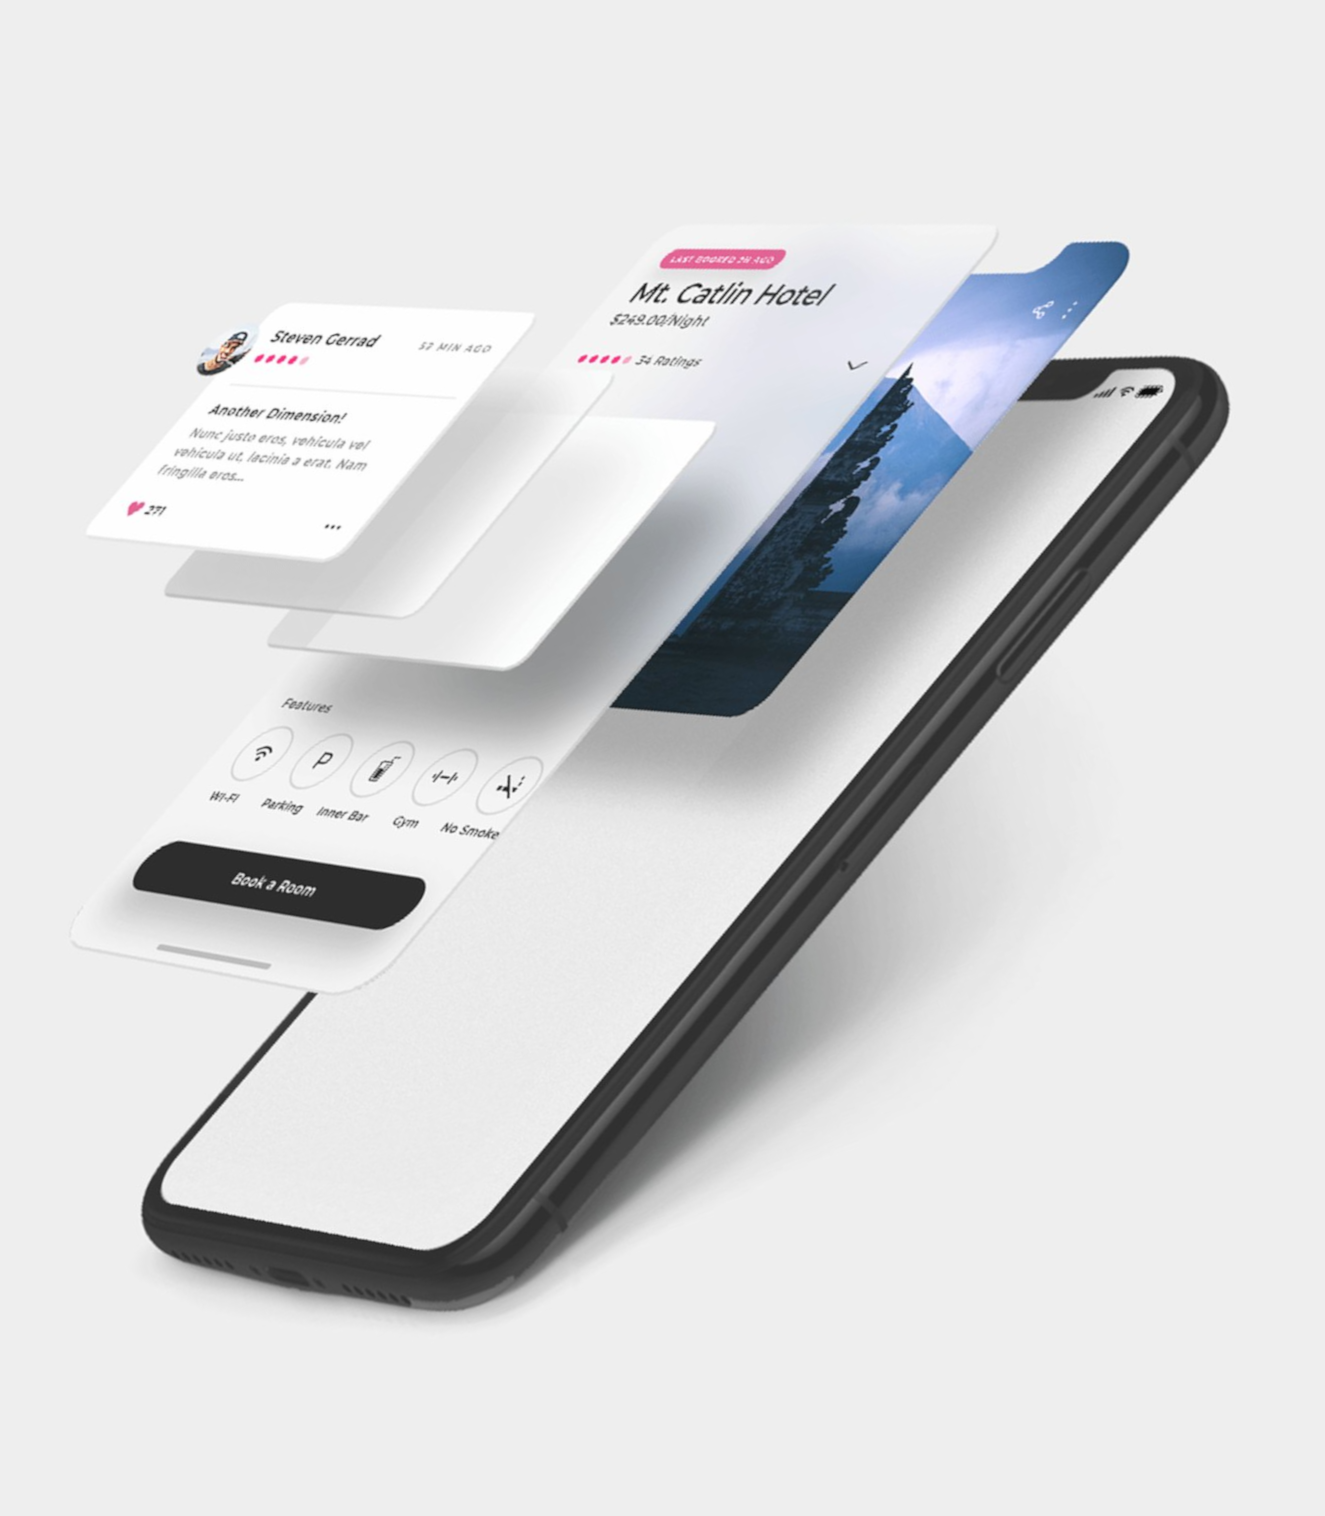 A mobile mockup with multiple floating screens displaying mobile apps